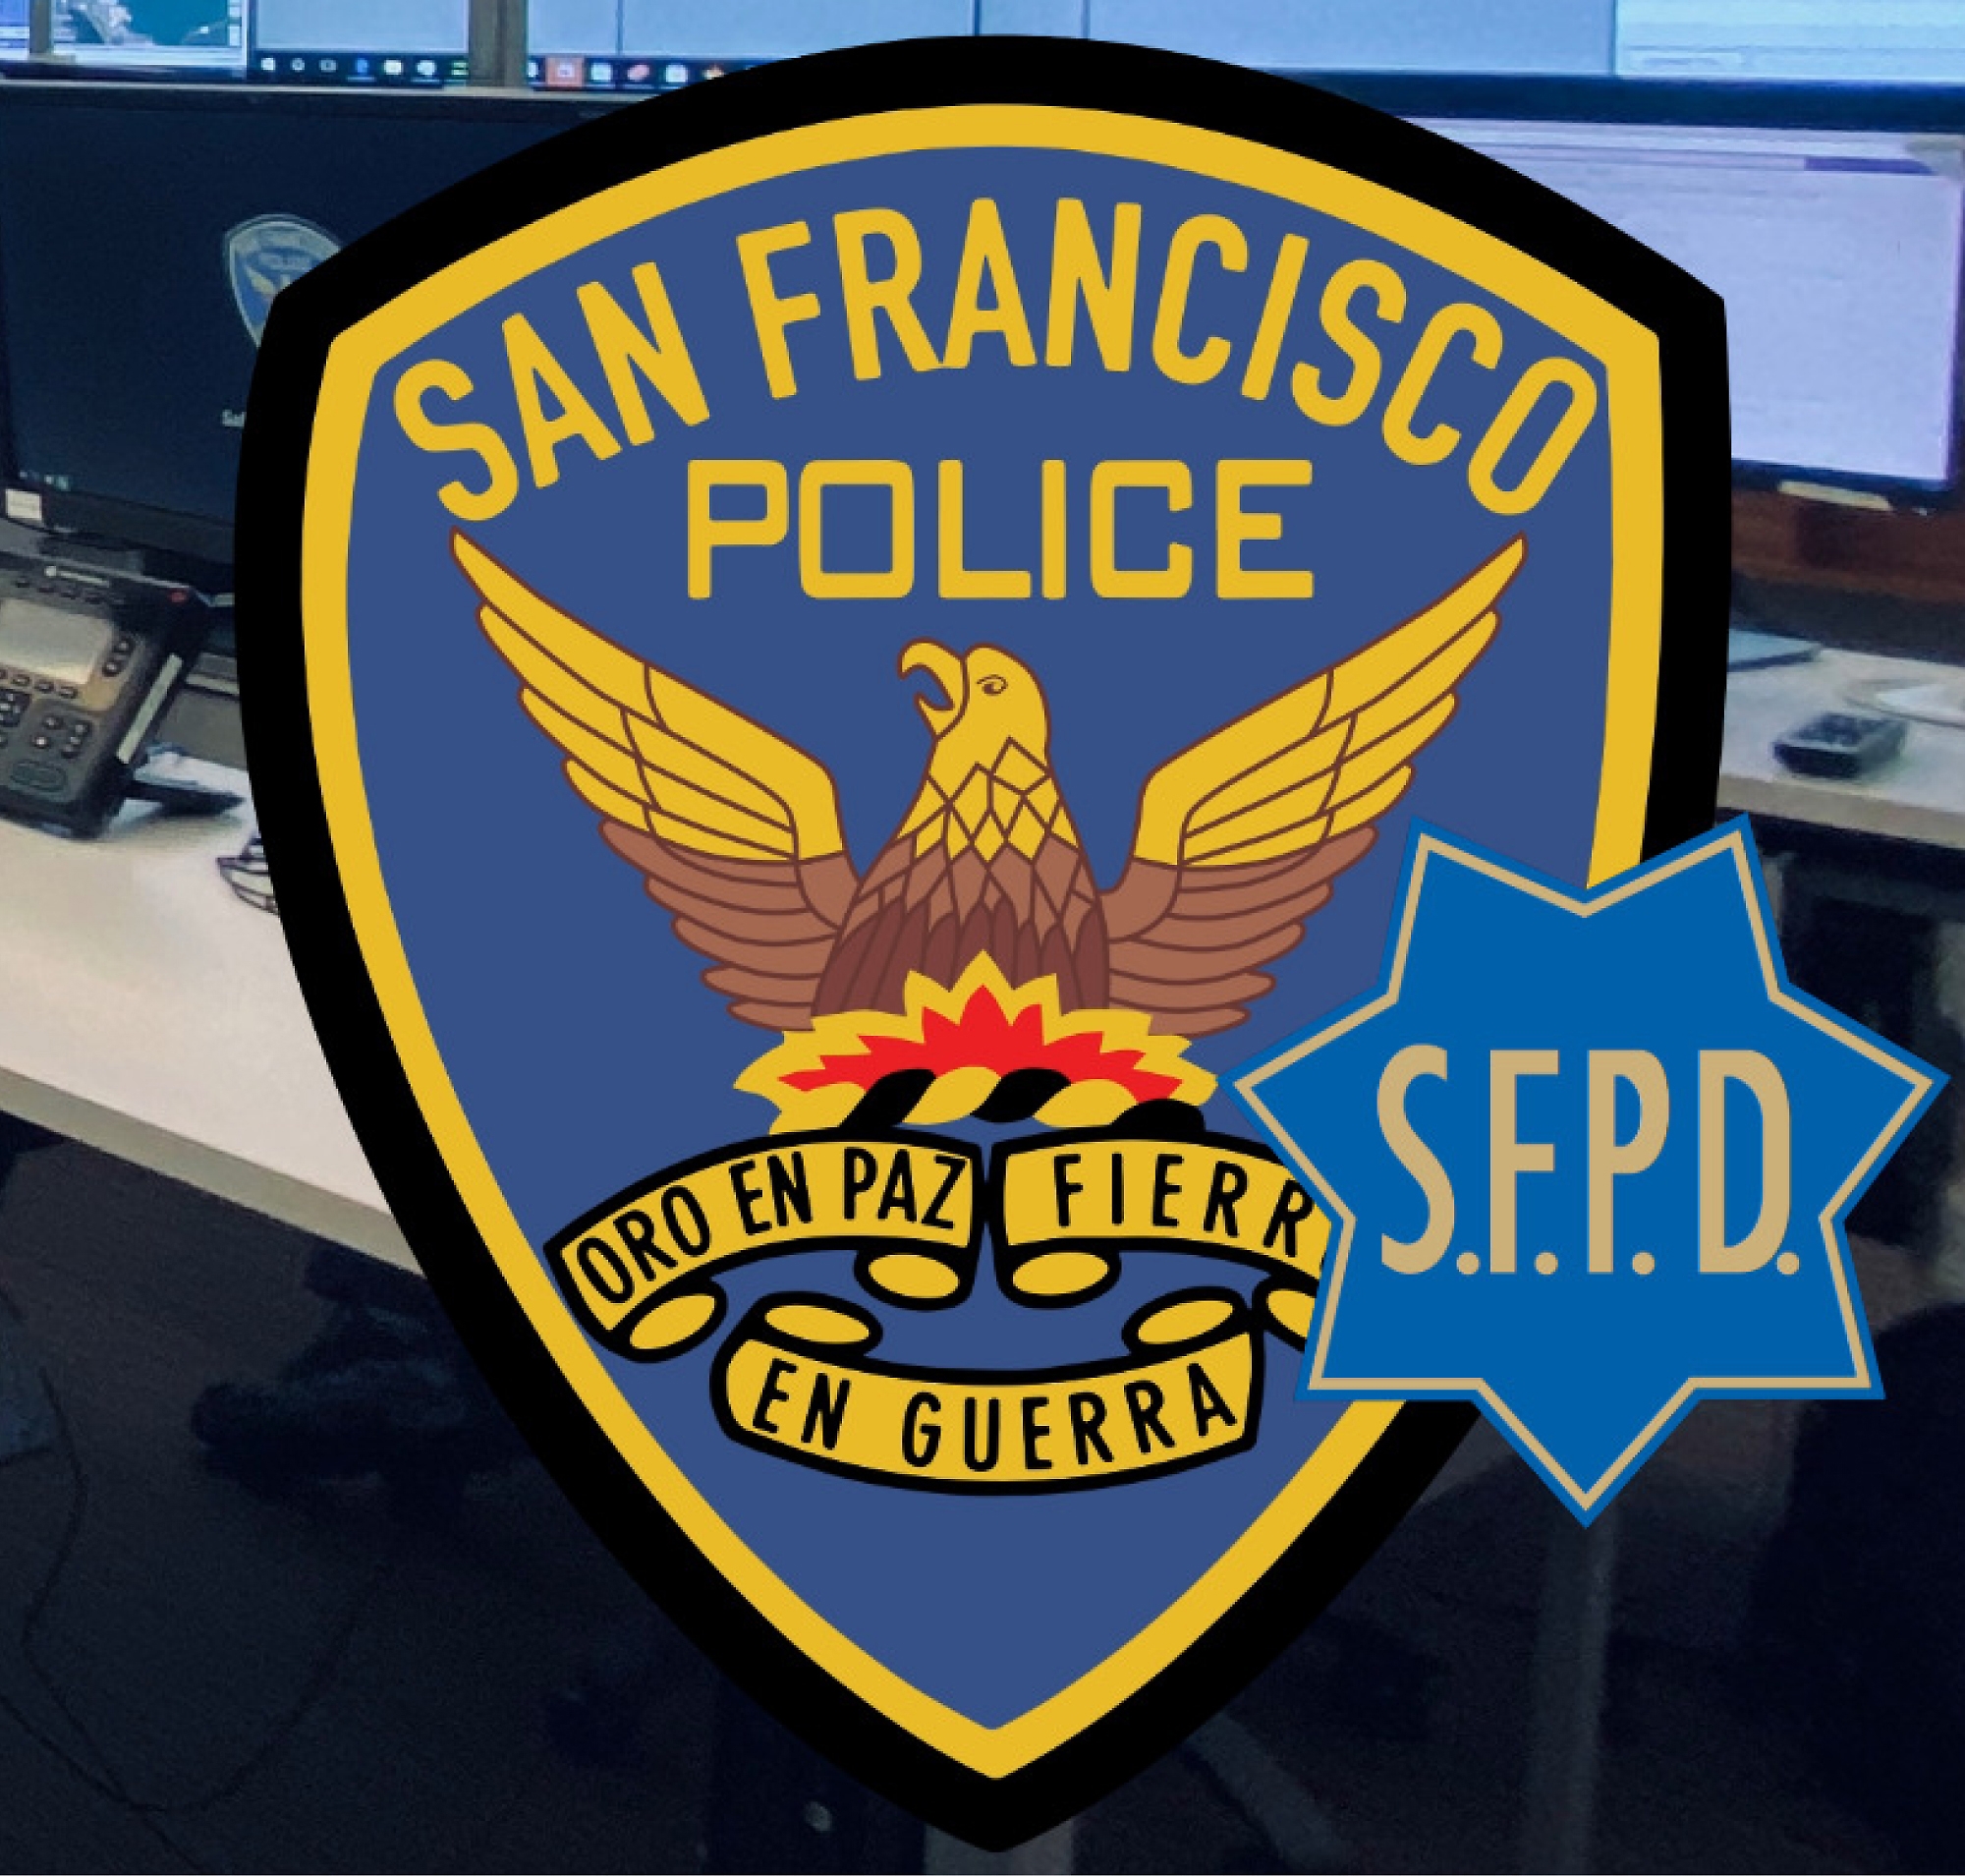 Badge of the san francisco police department with the motto "oro en paz, fierro en guerra" against a blurred background 